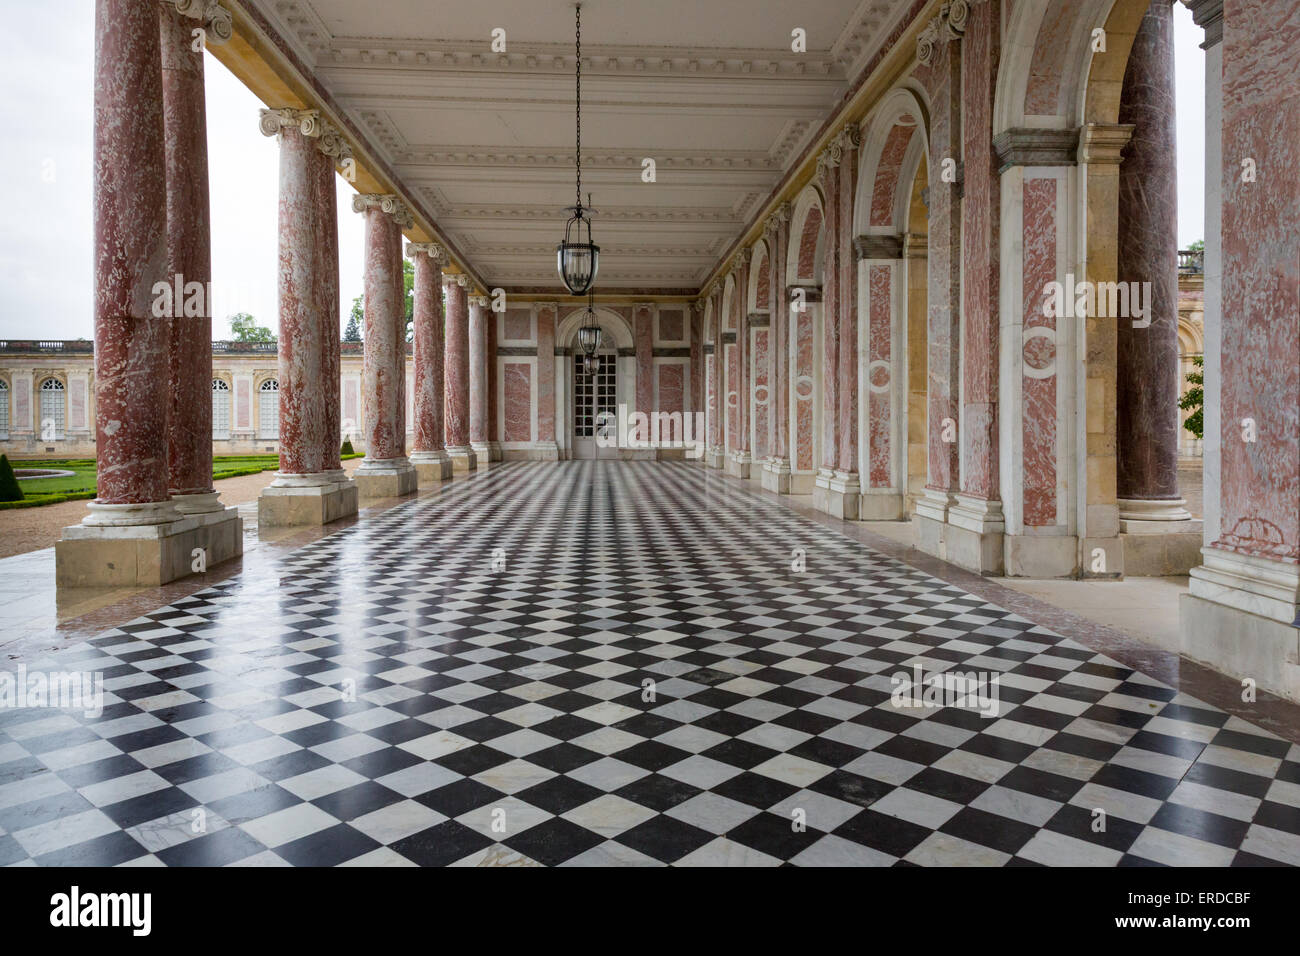 The Peristyle of the Grand Trianon at the Chateau de Versailles, France Stock Photo